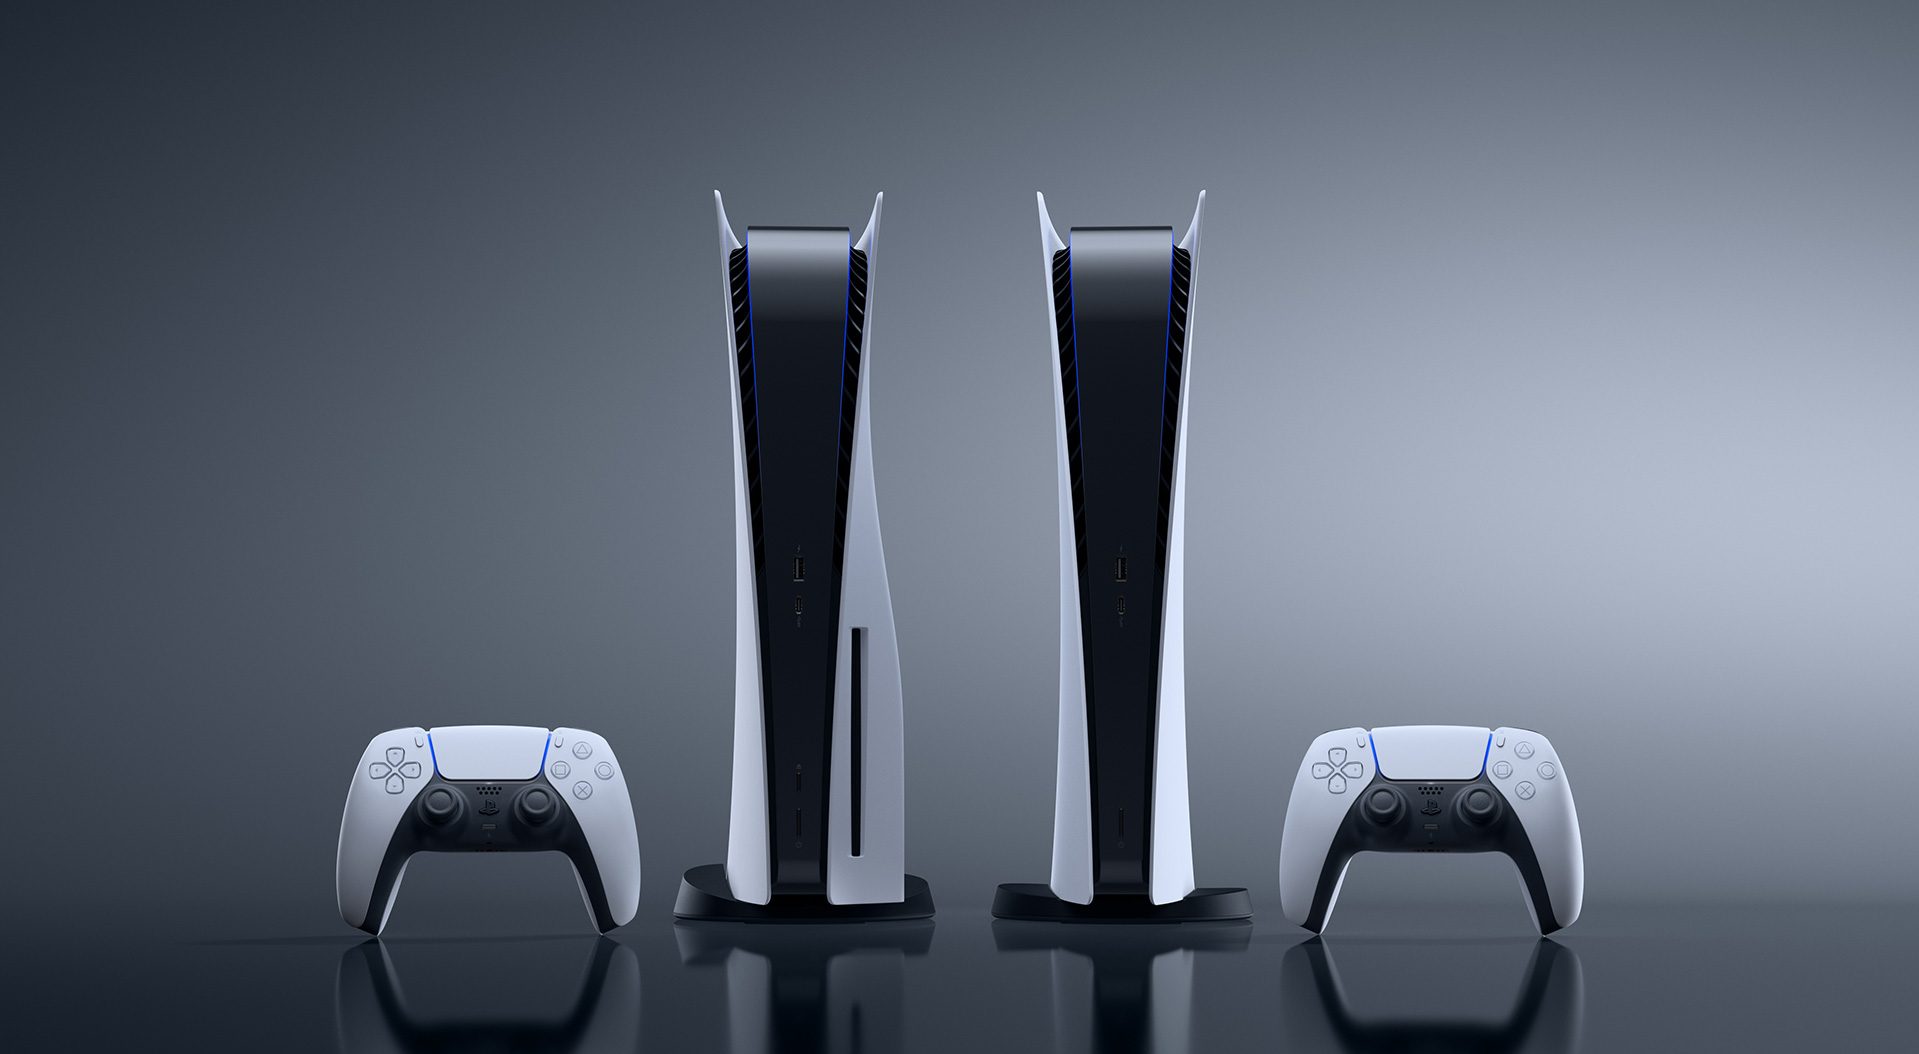 PlayStation 5 consoles, with and without disc drive, side by side on a grey background